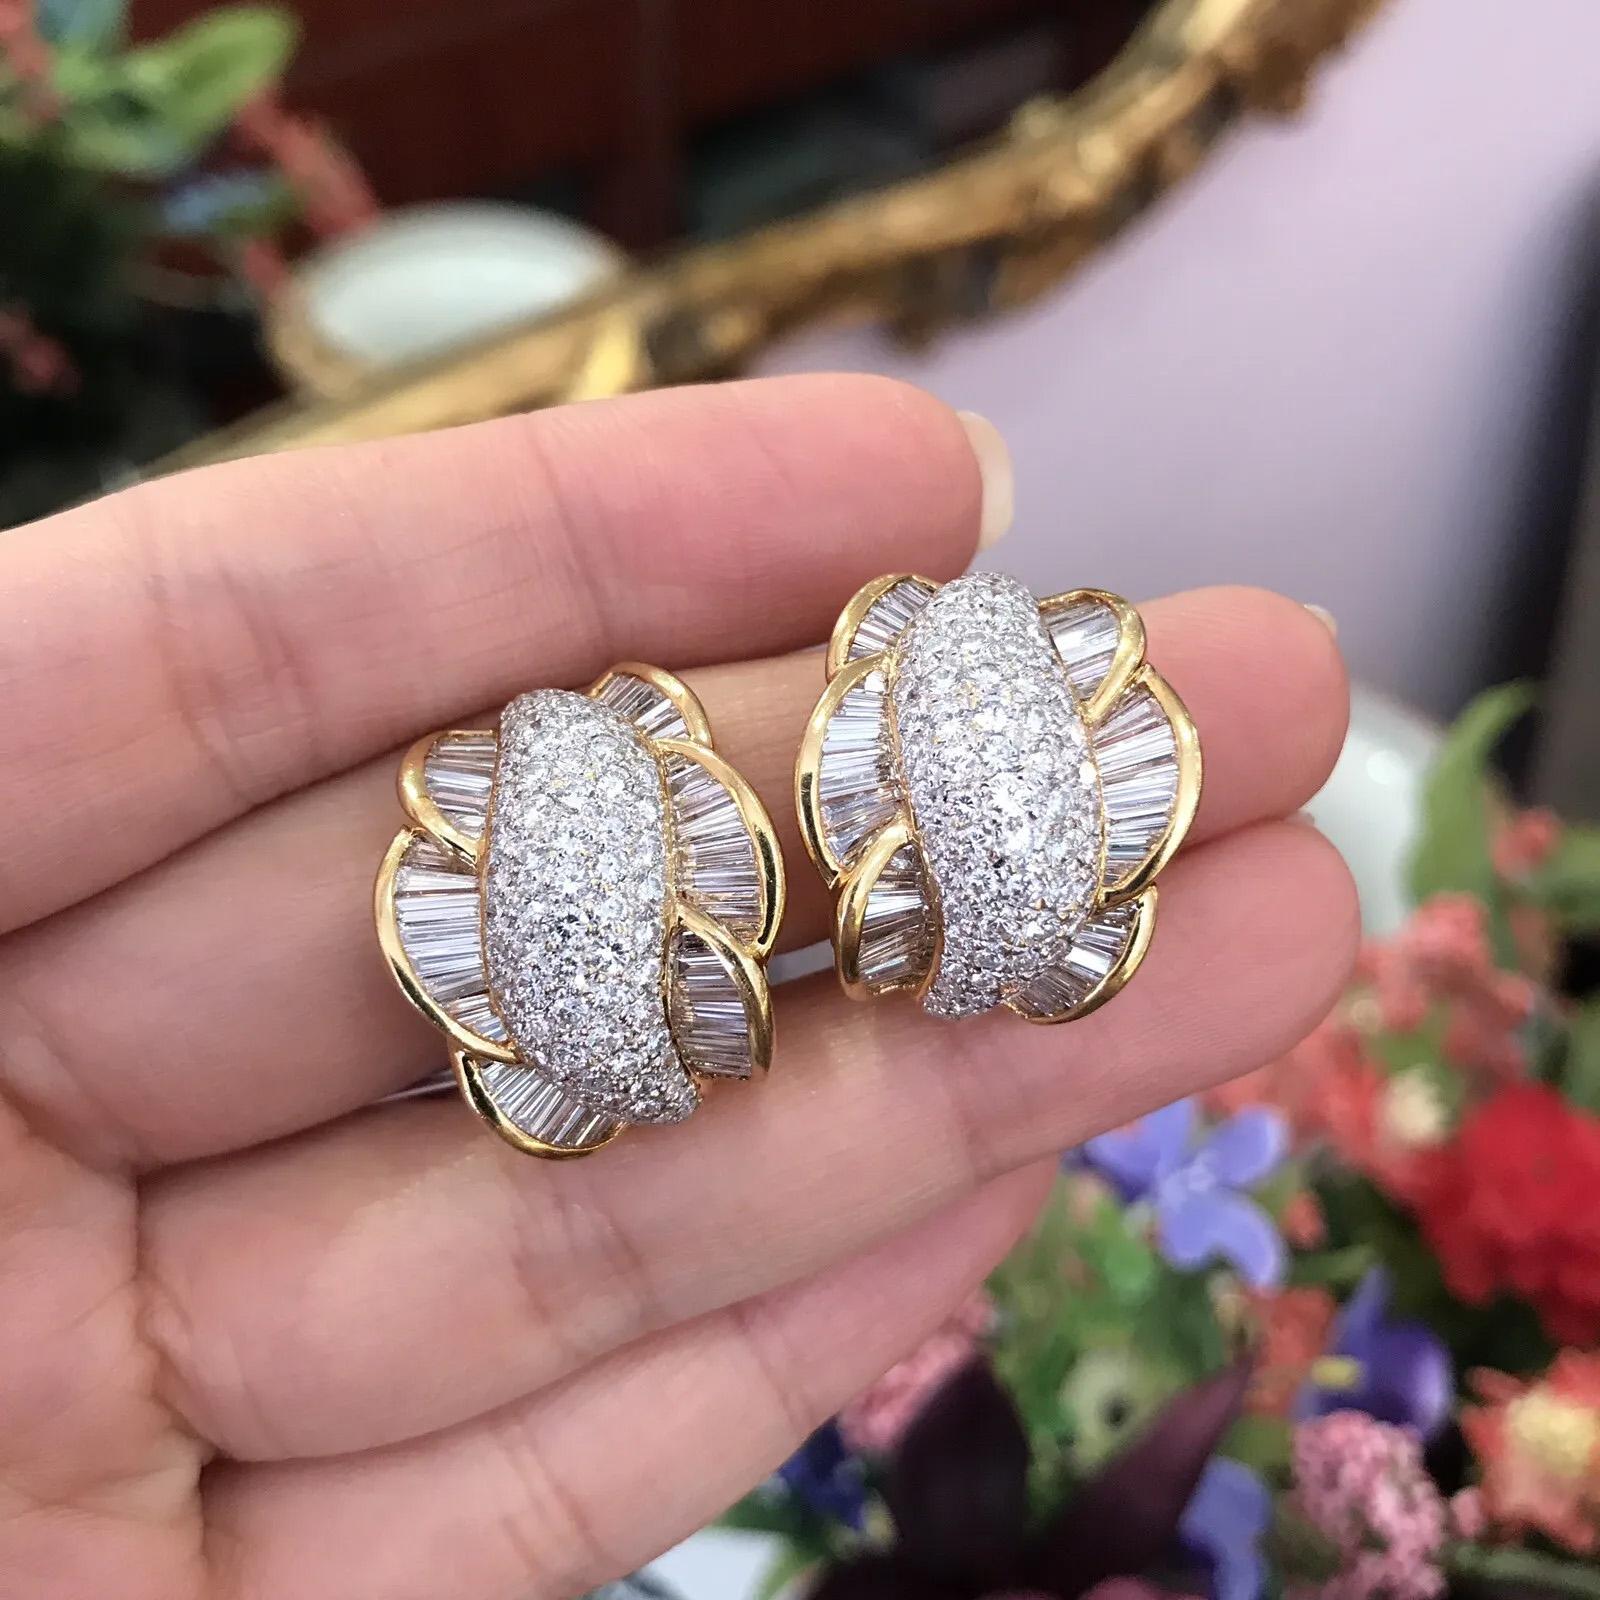 Baguette and Pave Diamond Half Hoop Earrings in 18k Yellow Gold 6.81 Carat Total Weight

Pave Diamond and Baguette Diamond Earrings features Center section of Round Brilliant cut Diamonds Pave set flanked by rows of Baguette Diamonds set in 18k